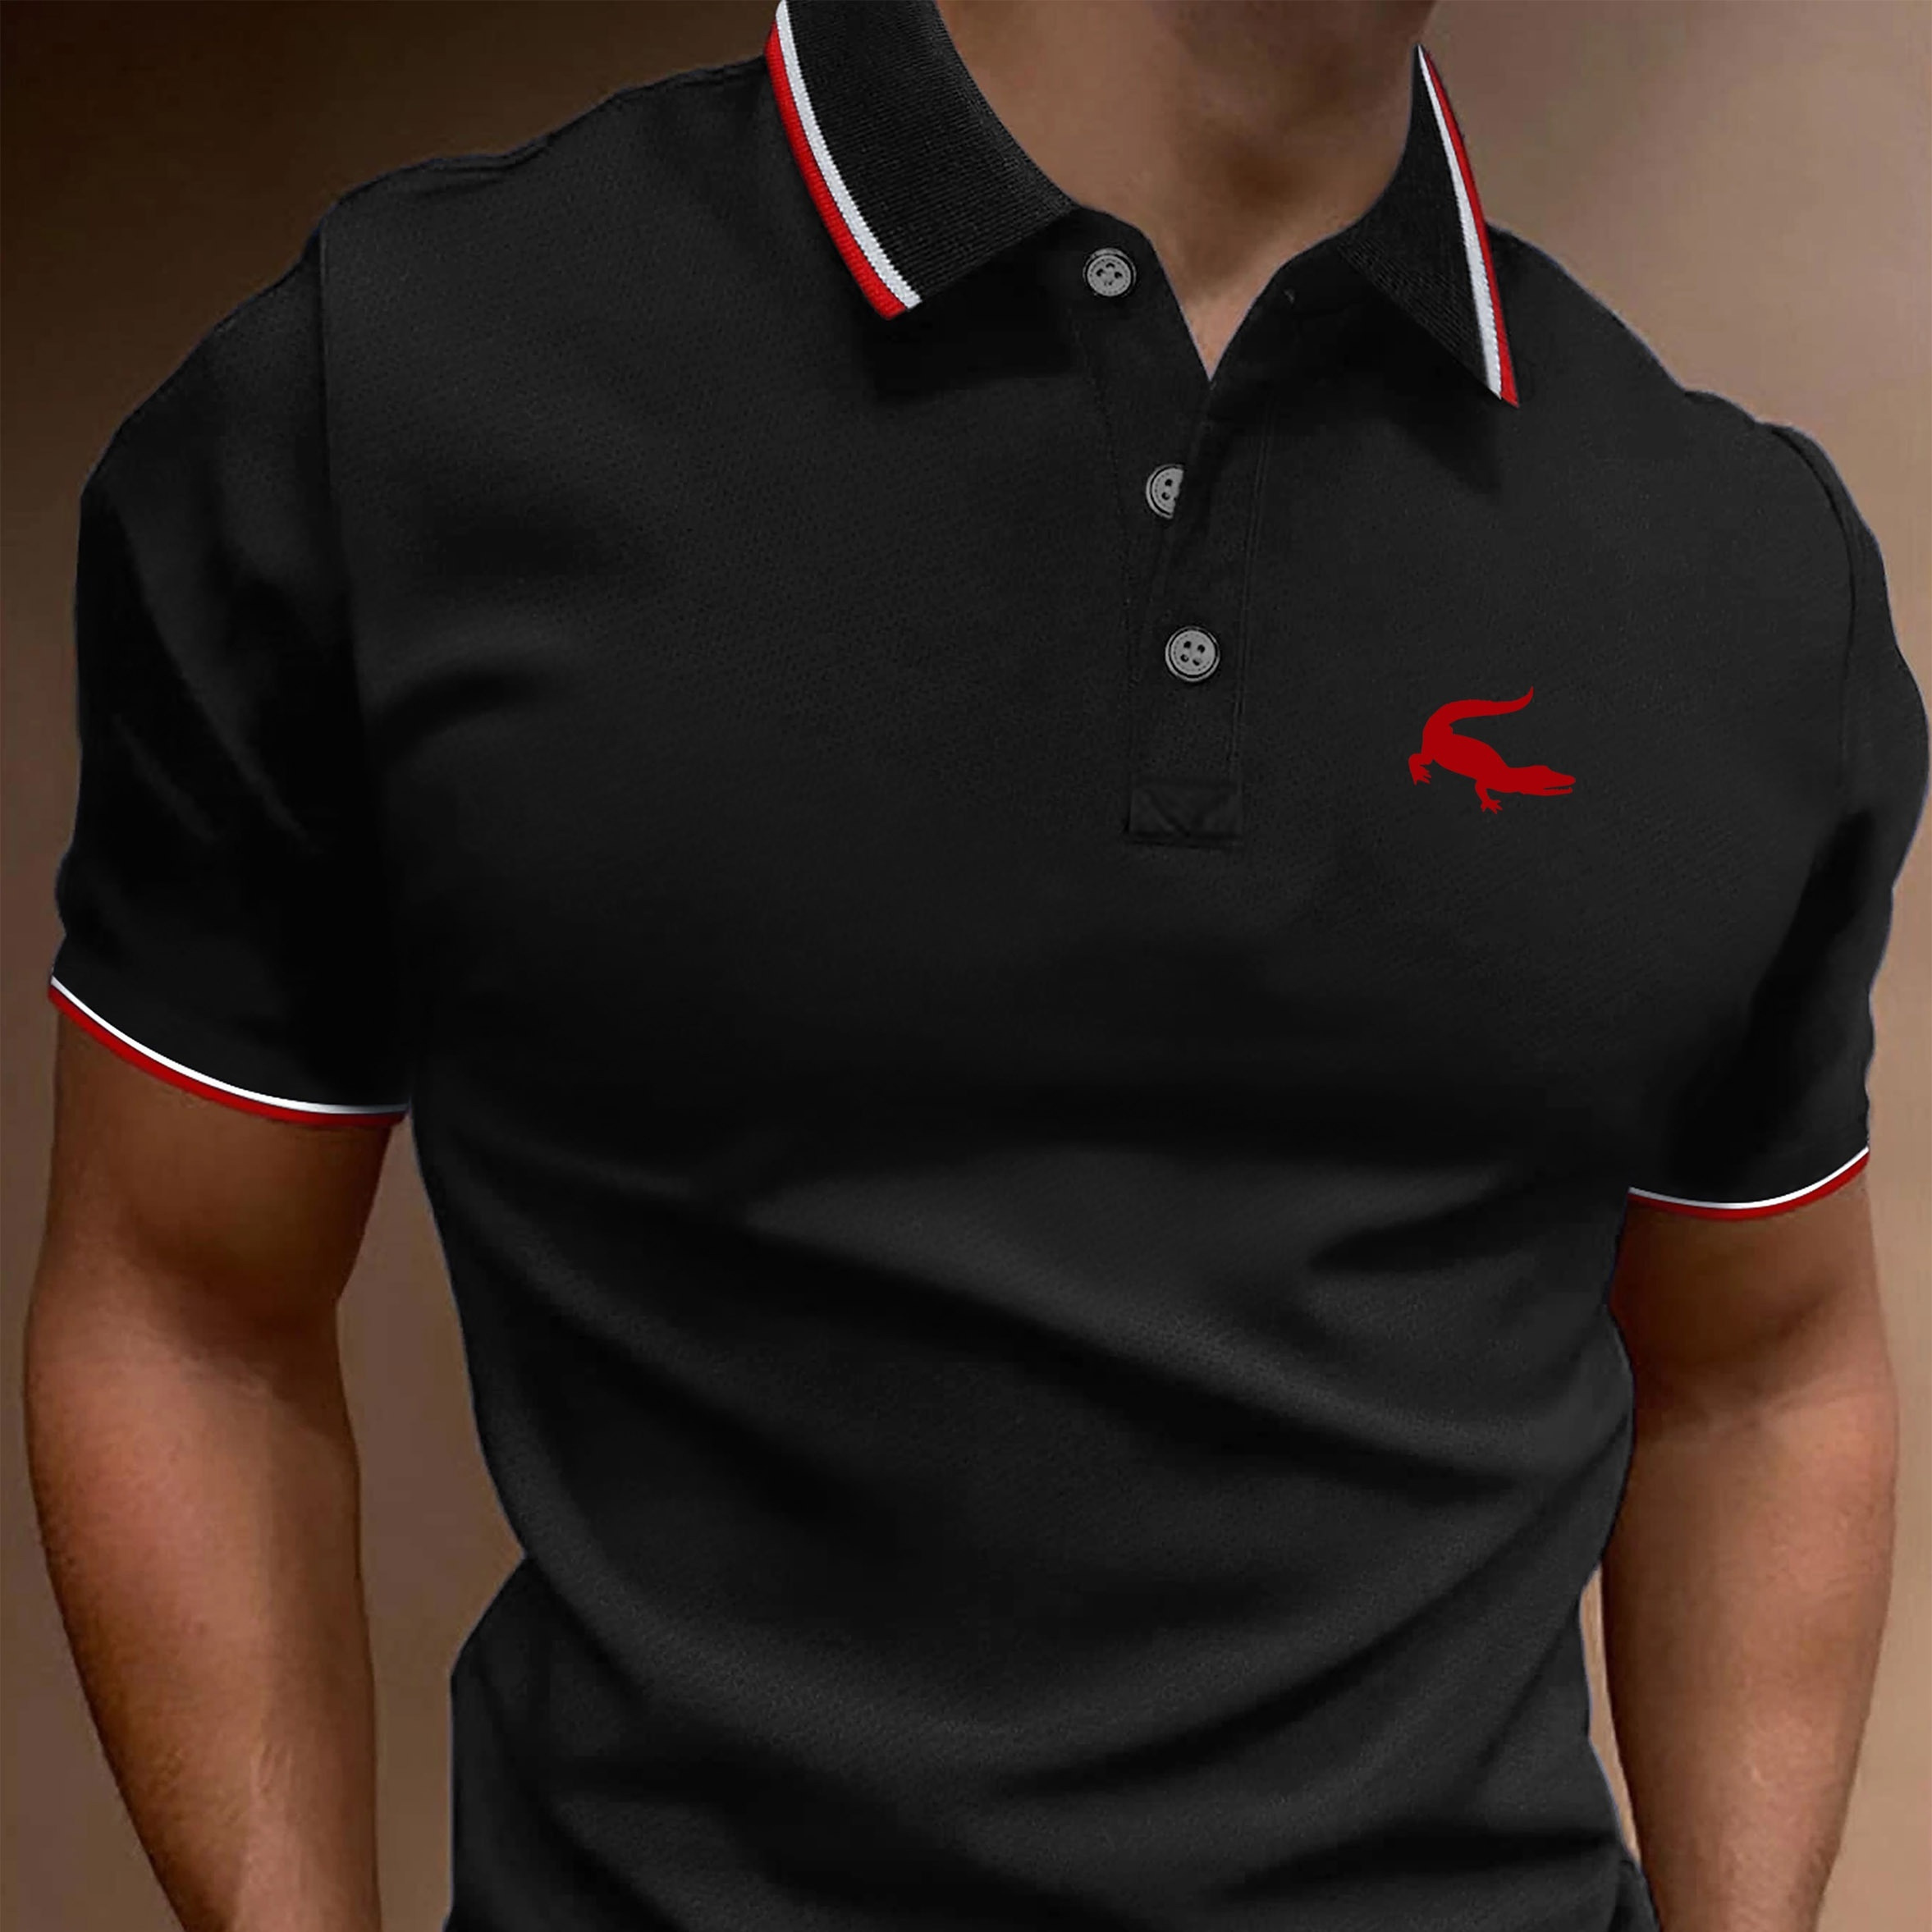 

Crocodile Print Summer Men's Fashionable Lapel Short Sleeve Golf T-shirt, Suitable For Commercial Entertainment Occasions, Such As Tennis And Golf, Men's Clothing, As Gifts